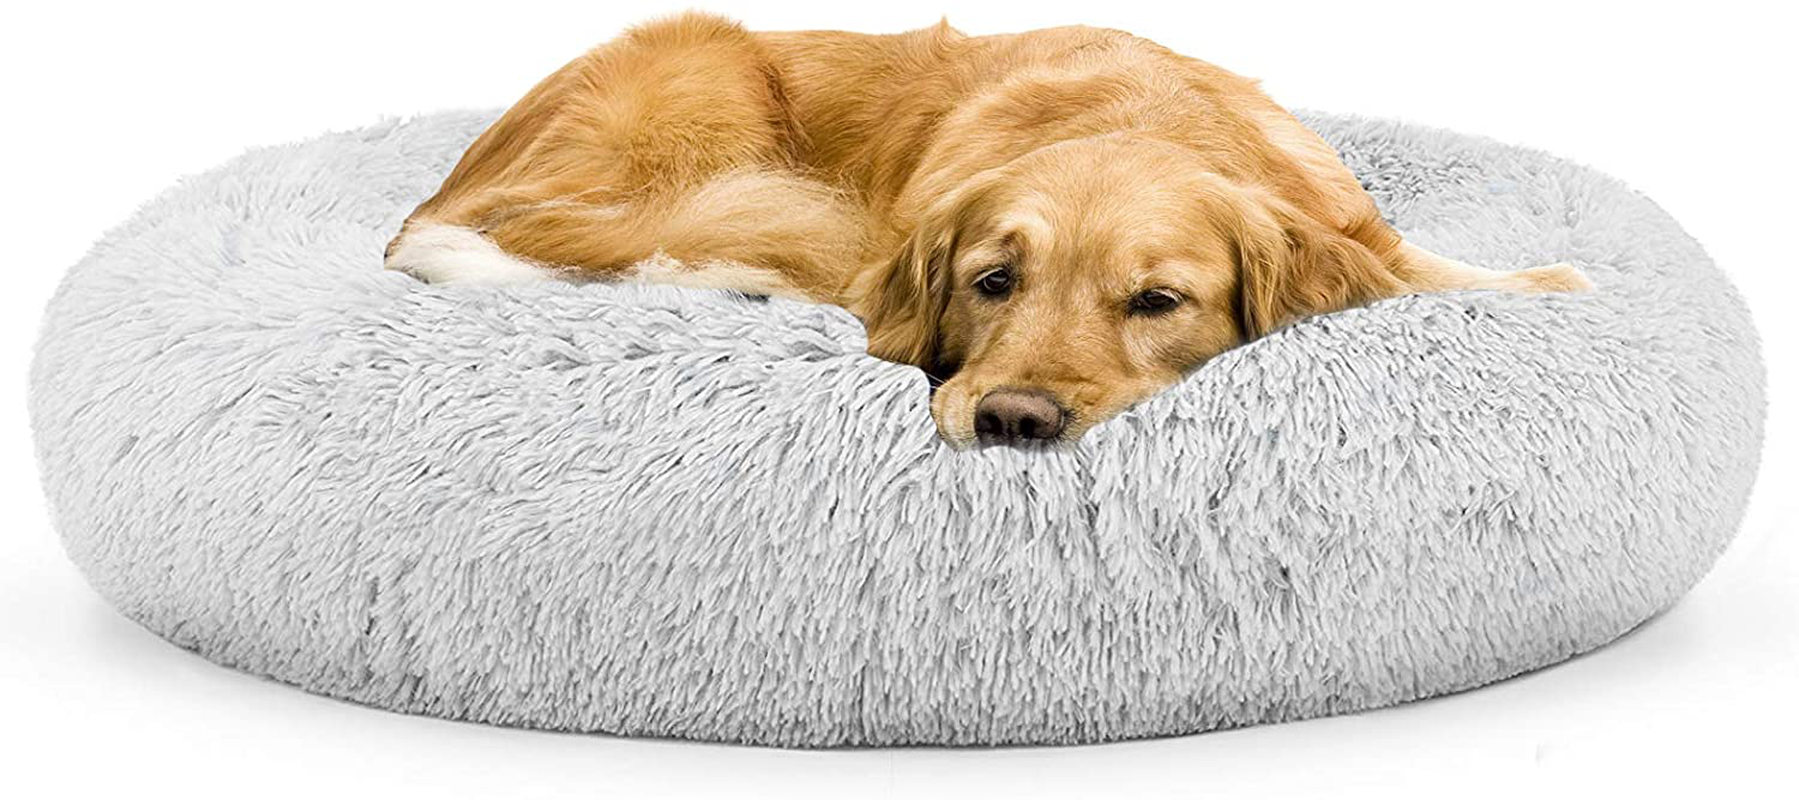 Plush Donut Shape Pet Bed for Dogs, Cats, and other Furry Family